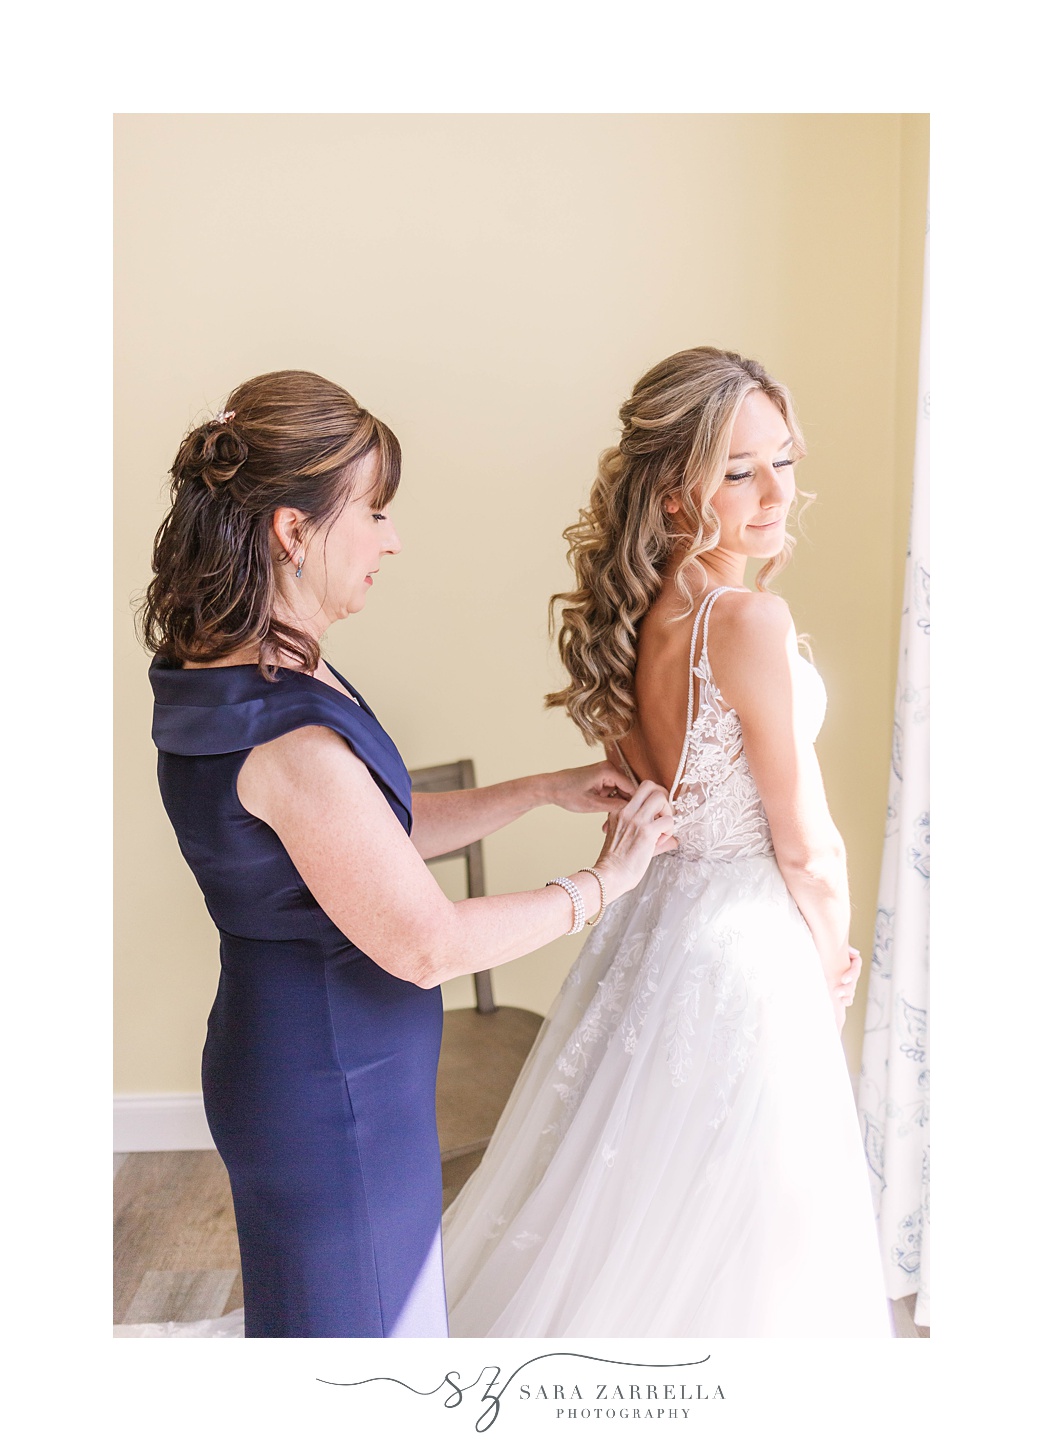 mother helps bride with wedding gown before whimsical garden wedding on Rhode Island farm